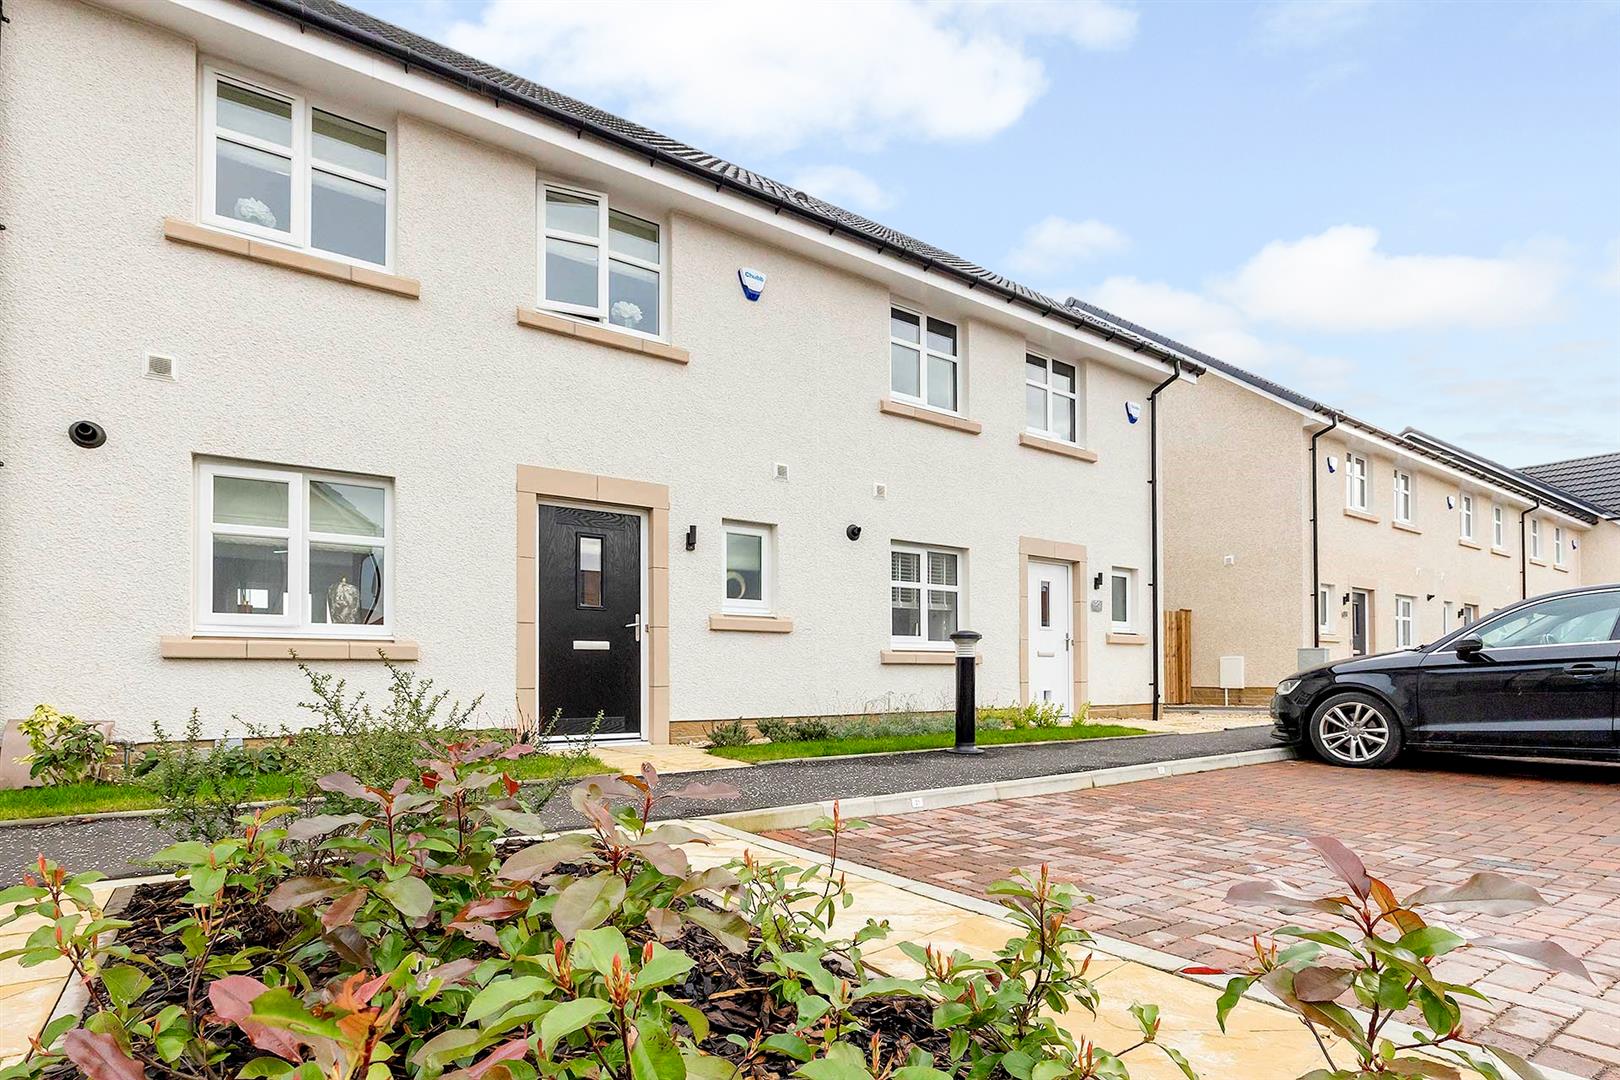 3 bed terraced house for sale in Ferniesyde Court, Falkirk - Property Image 1